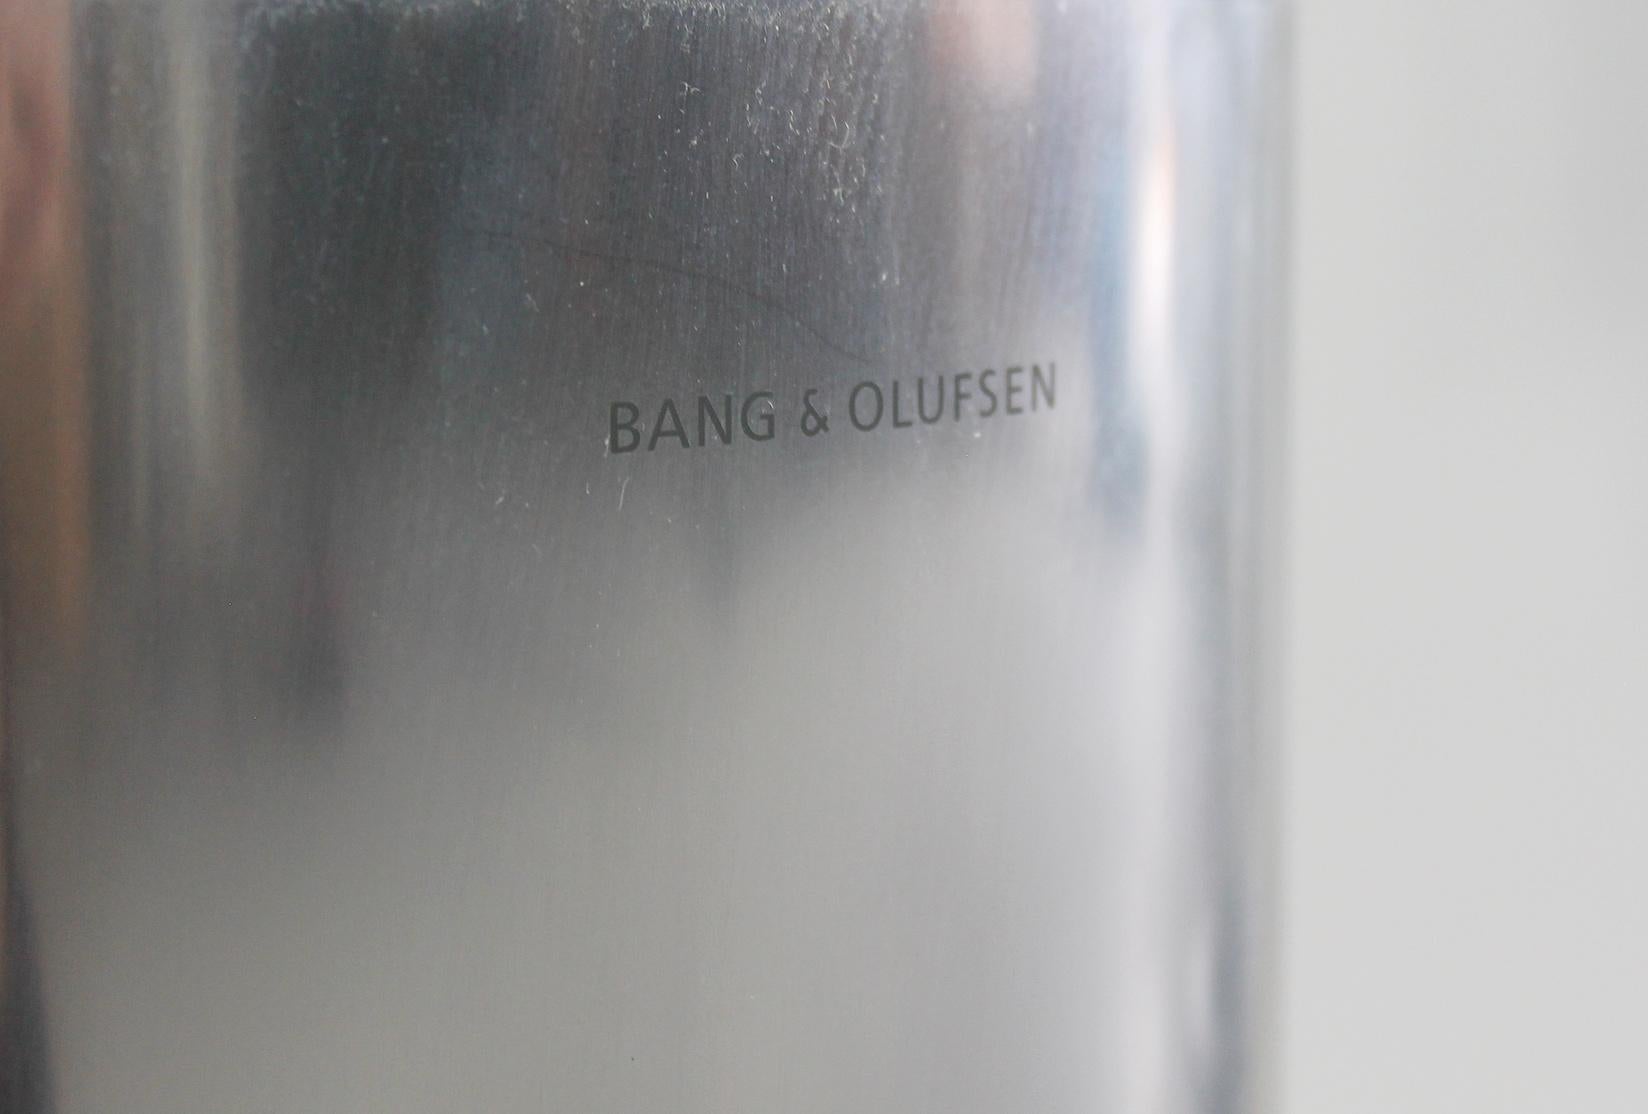 Bang & Olufsen BeoSound 9000 6-CD Tuner Hi-fi System 1990s by David Lewis For Sale 5